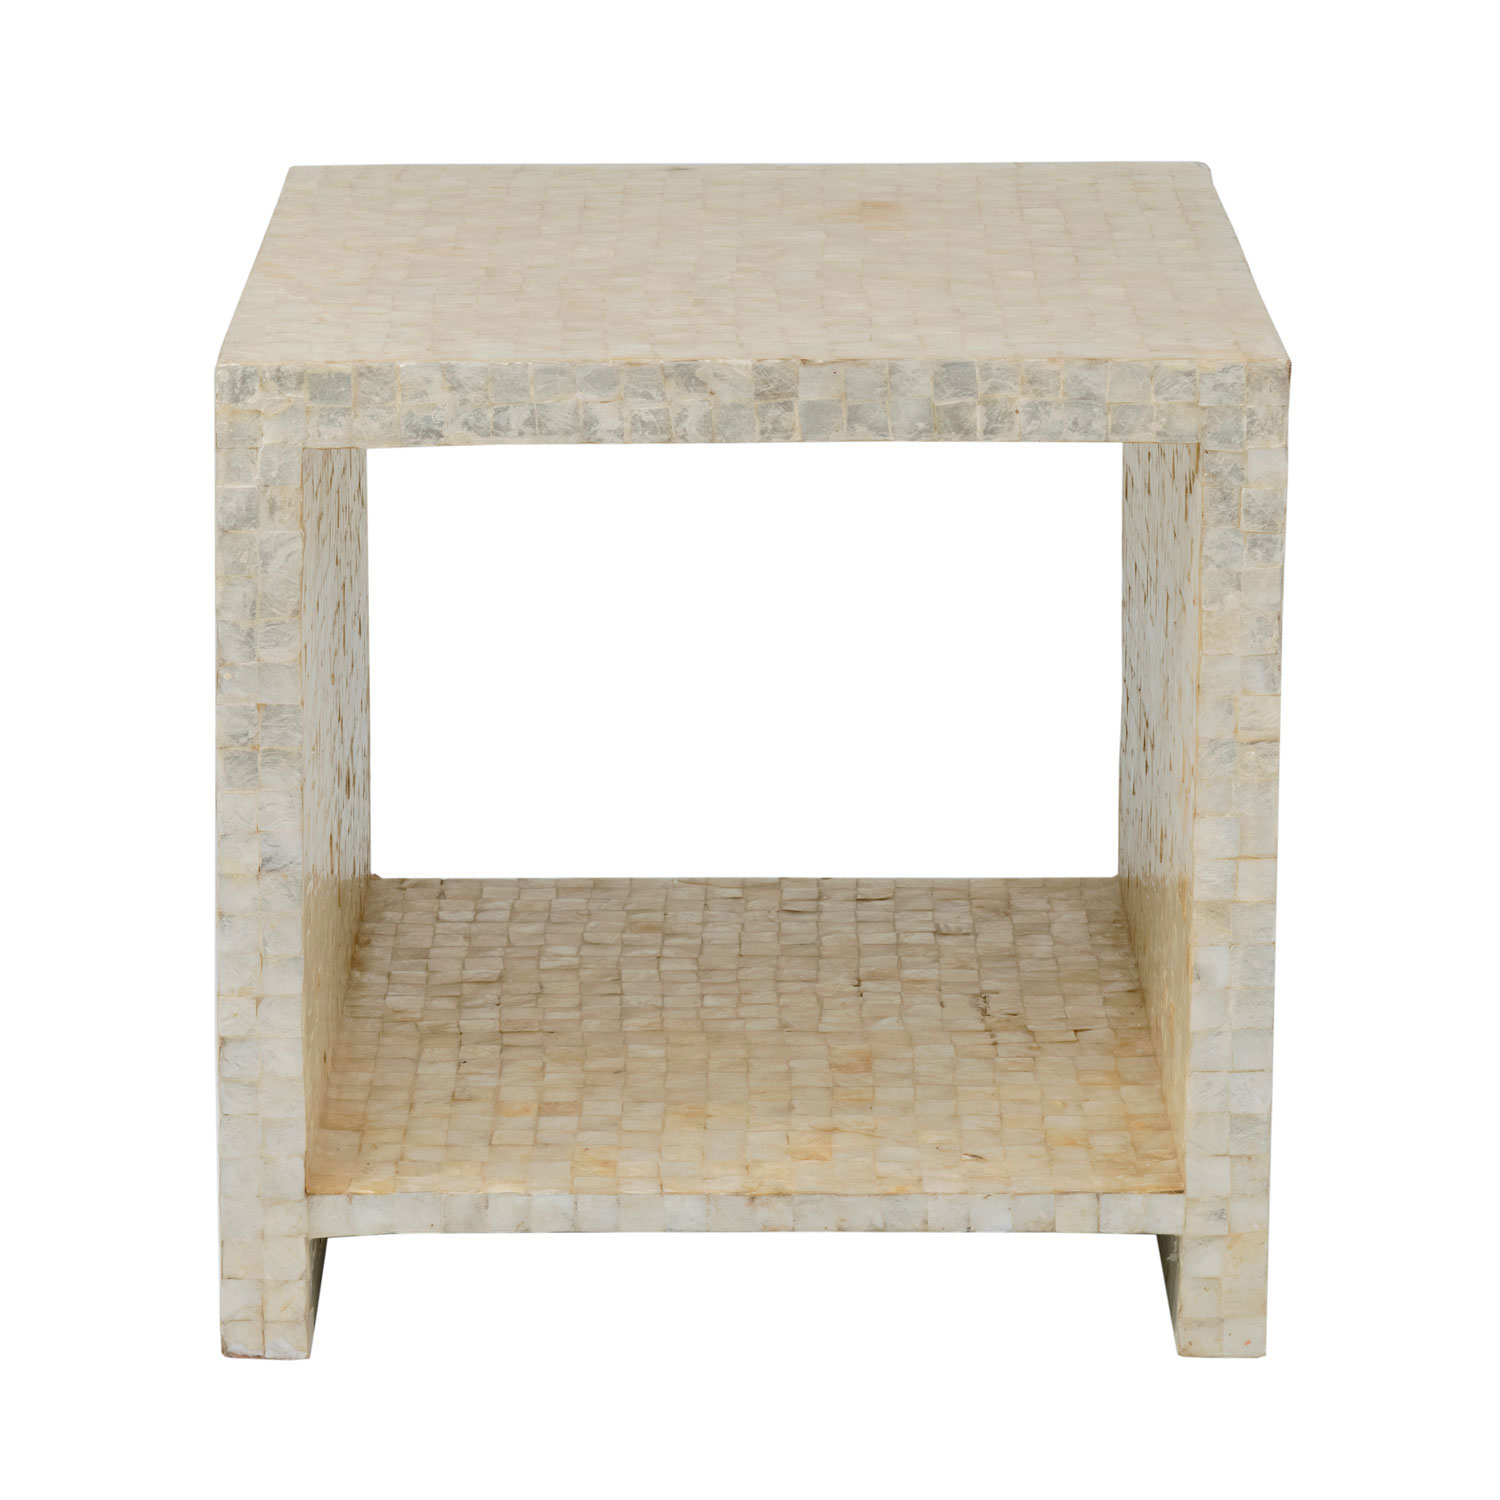 east main yutan off white square wood and capiz accent table hover zoom deck umbrella acrylic entry sauder milled cherry end ethan allen couches lamp rolling marble dining designs